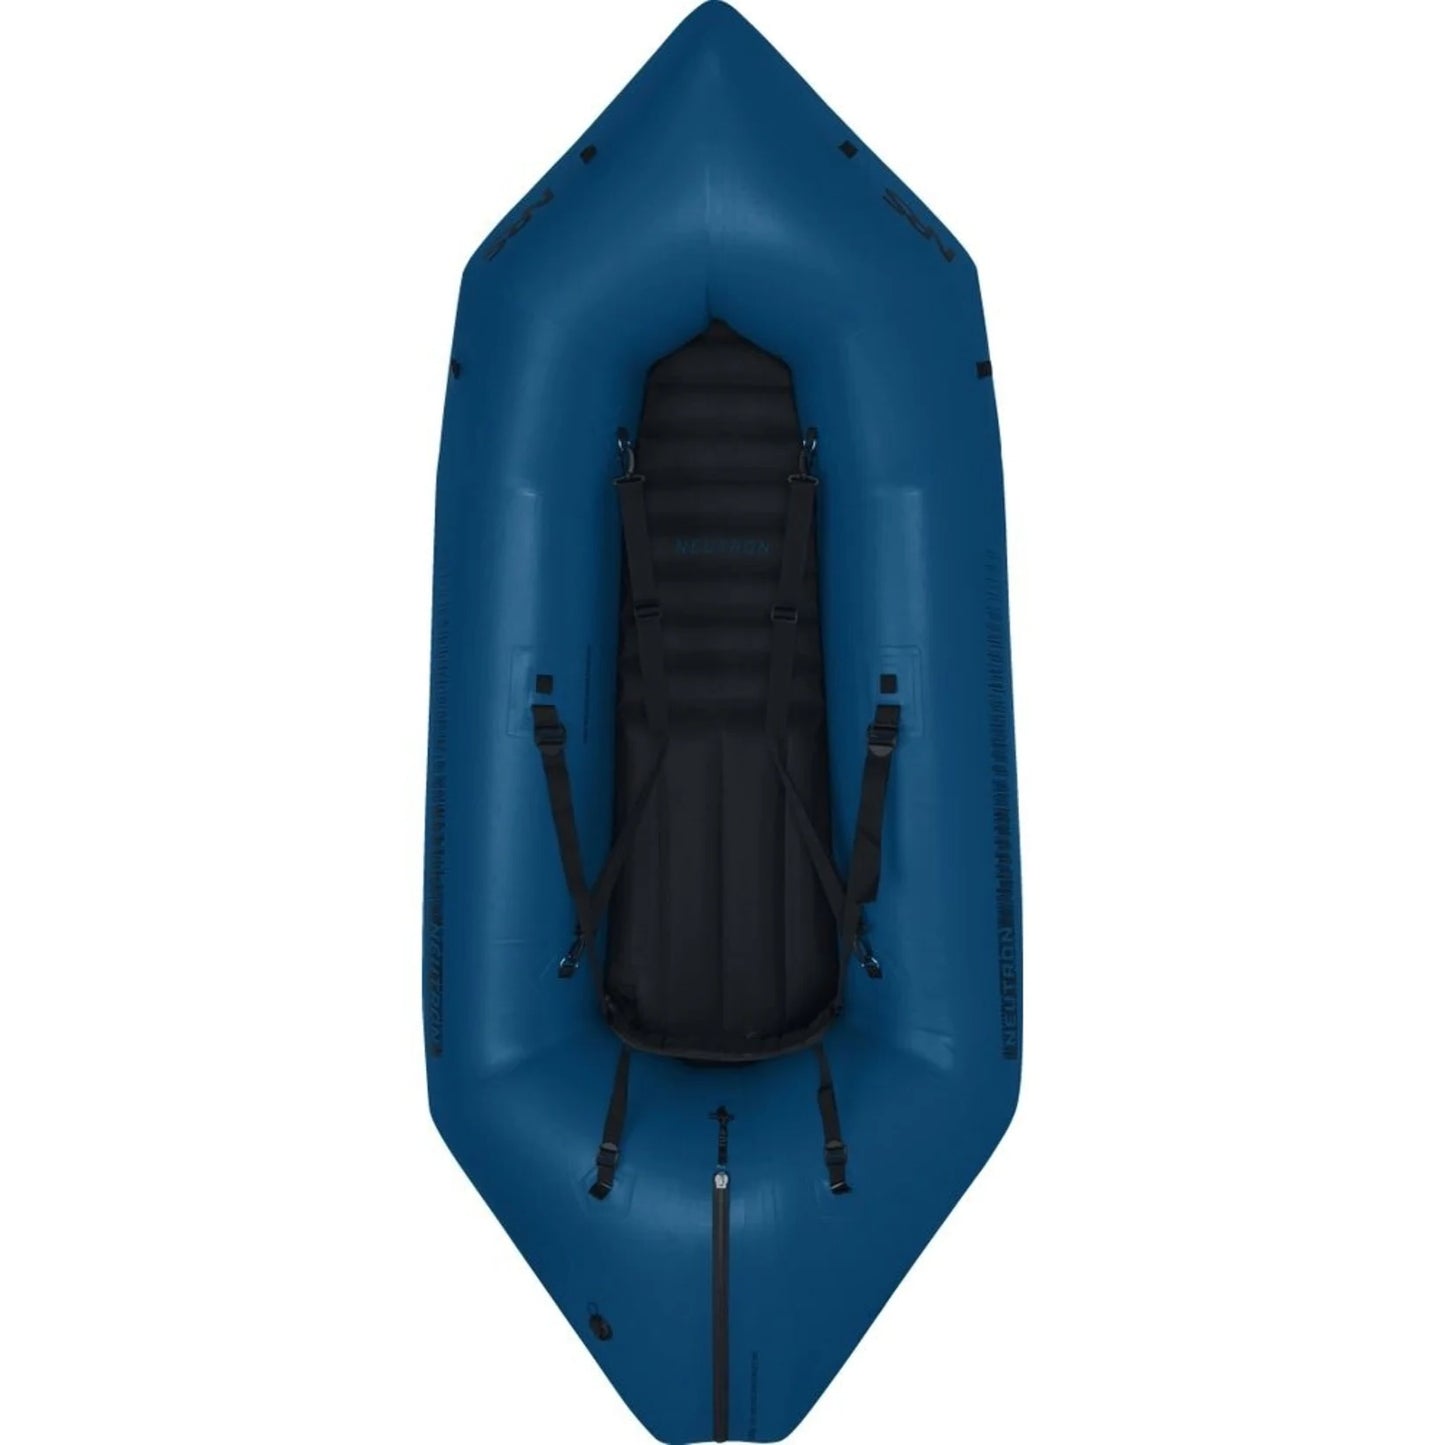 An NRS Neutron Packraft floating on a white background.